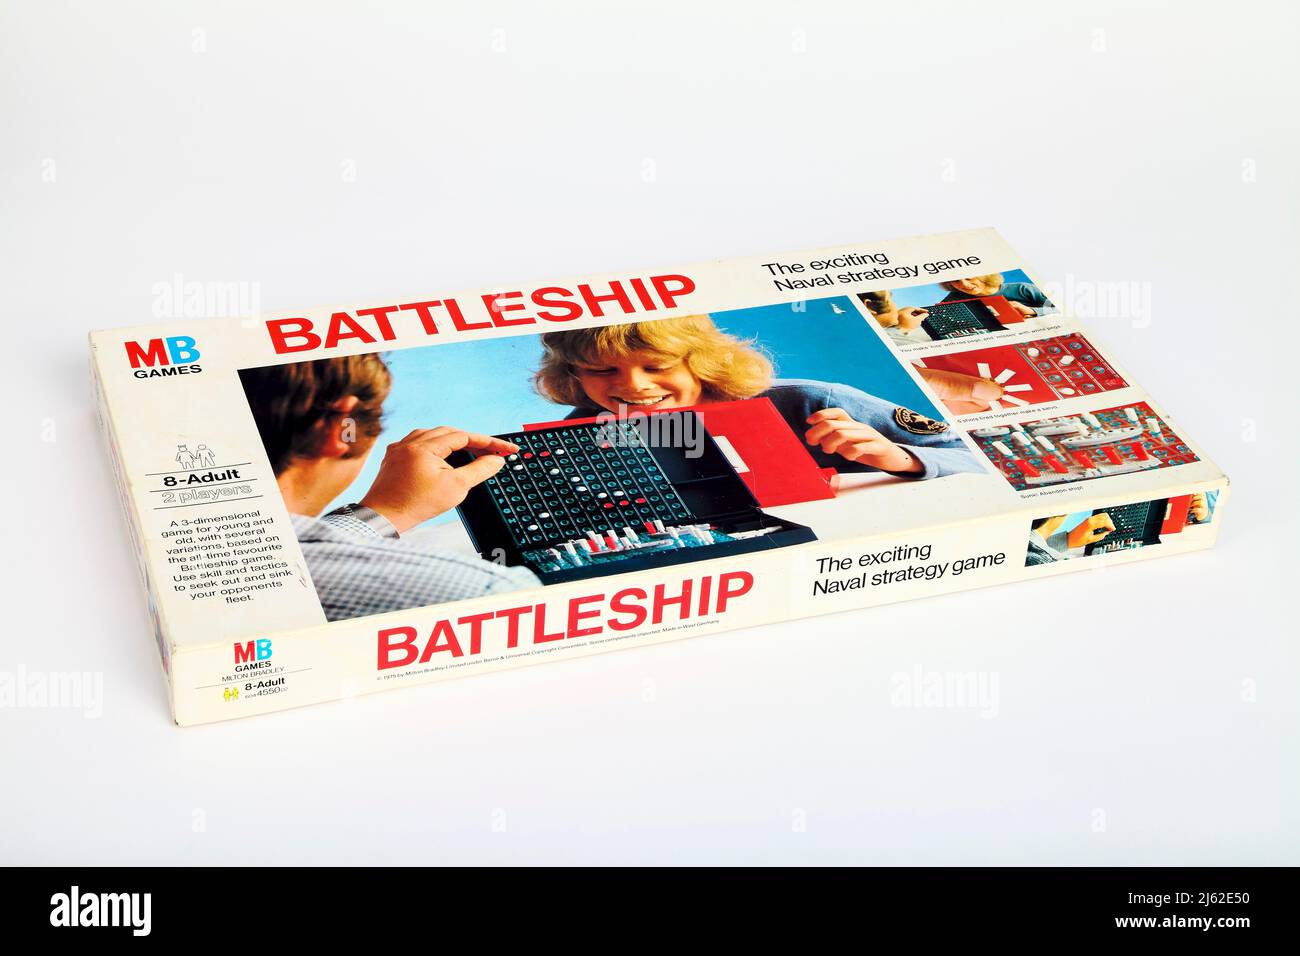 Mb Games Battleship tactical naval war strategy game for two players Stock Photo